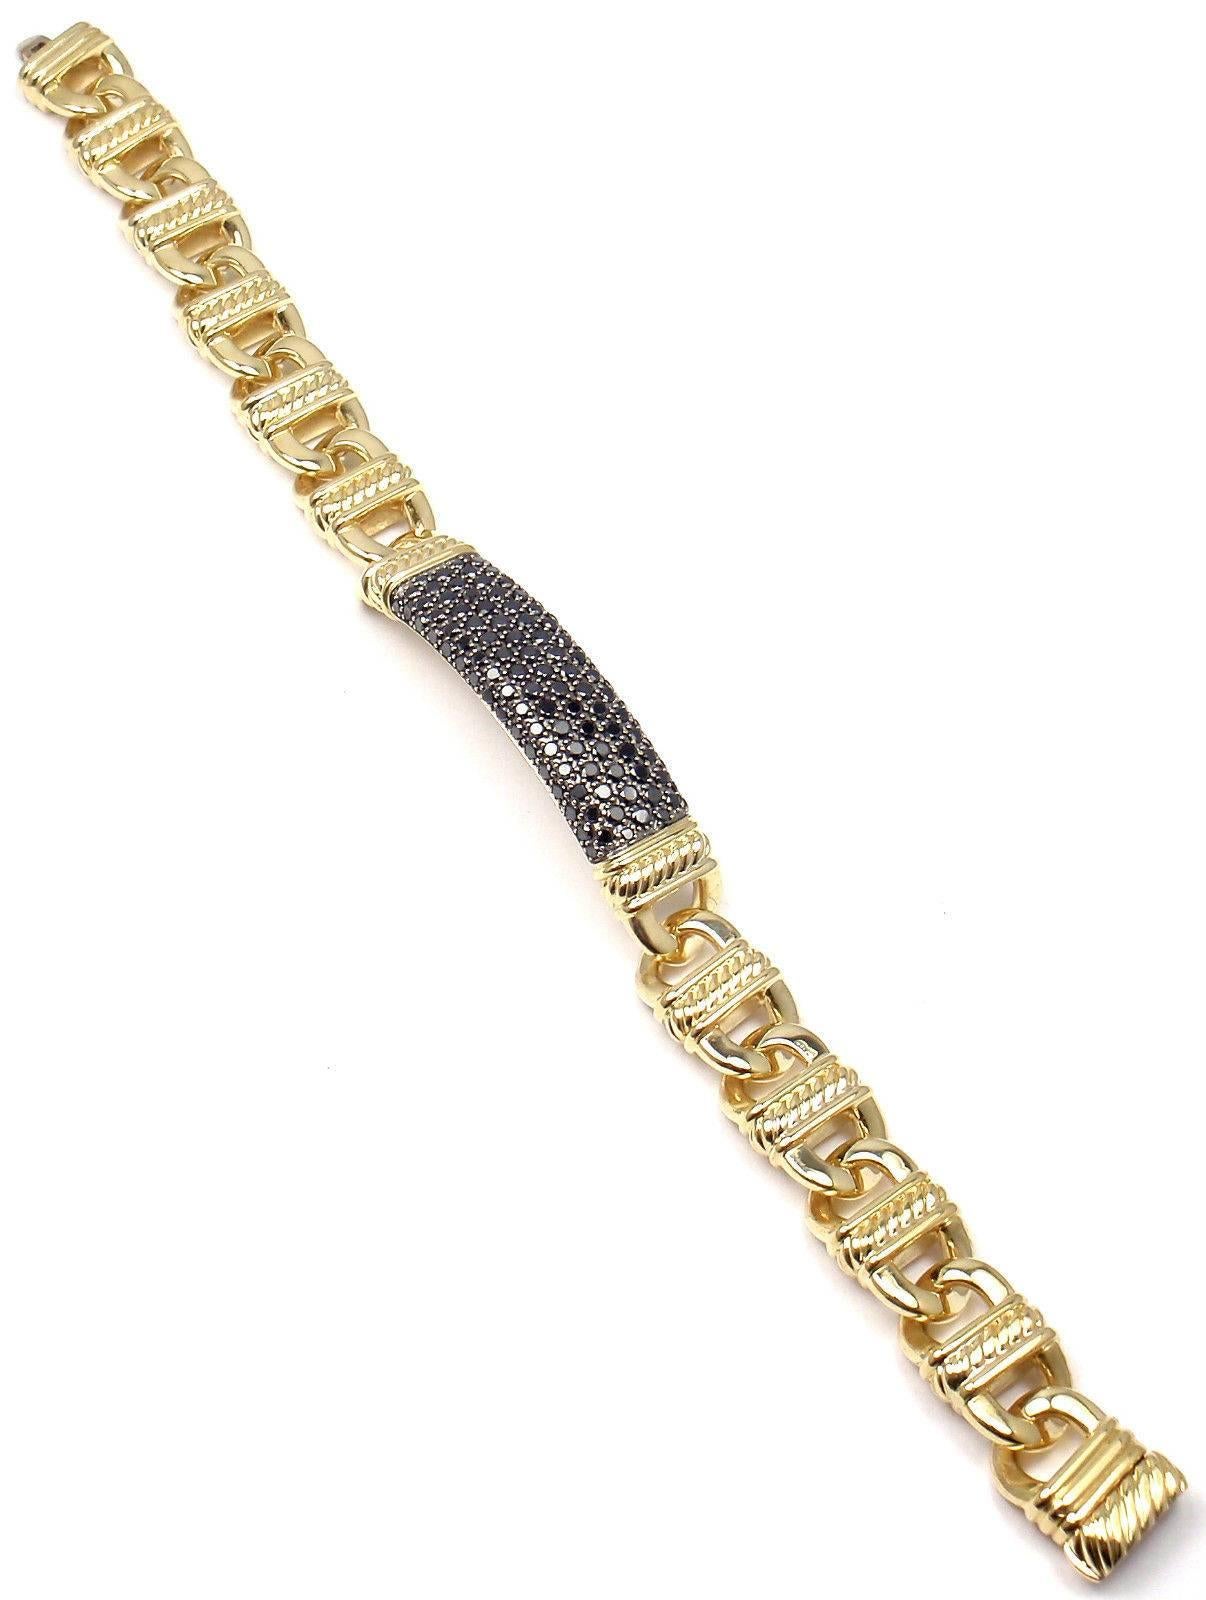 18k Yellow Gold Black Diamond ID Link Bracelet by David Yurman.
With round black diamonds total weight approx. 3.30ct

Details:
Length: 8.5